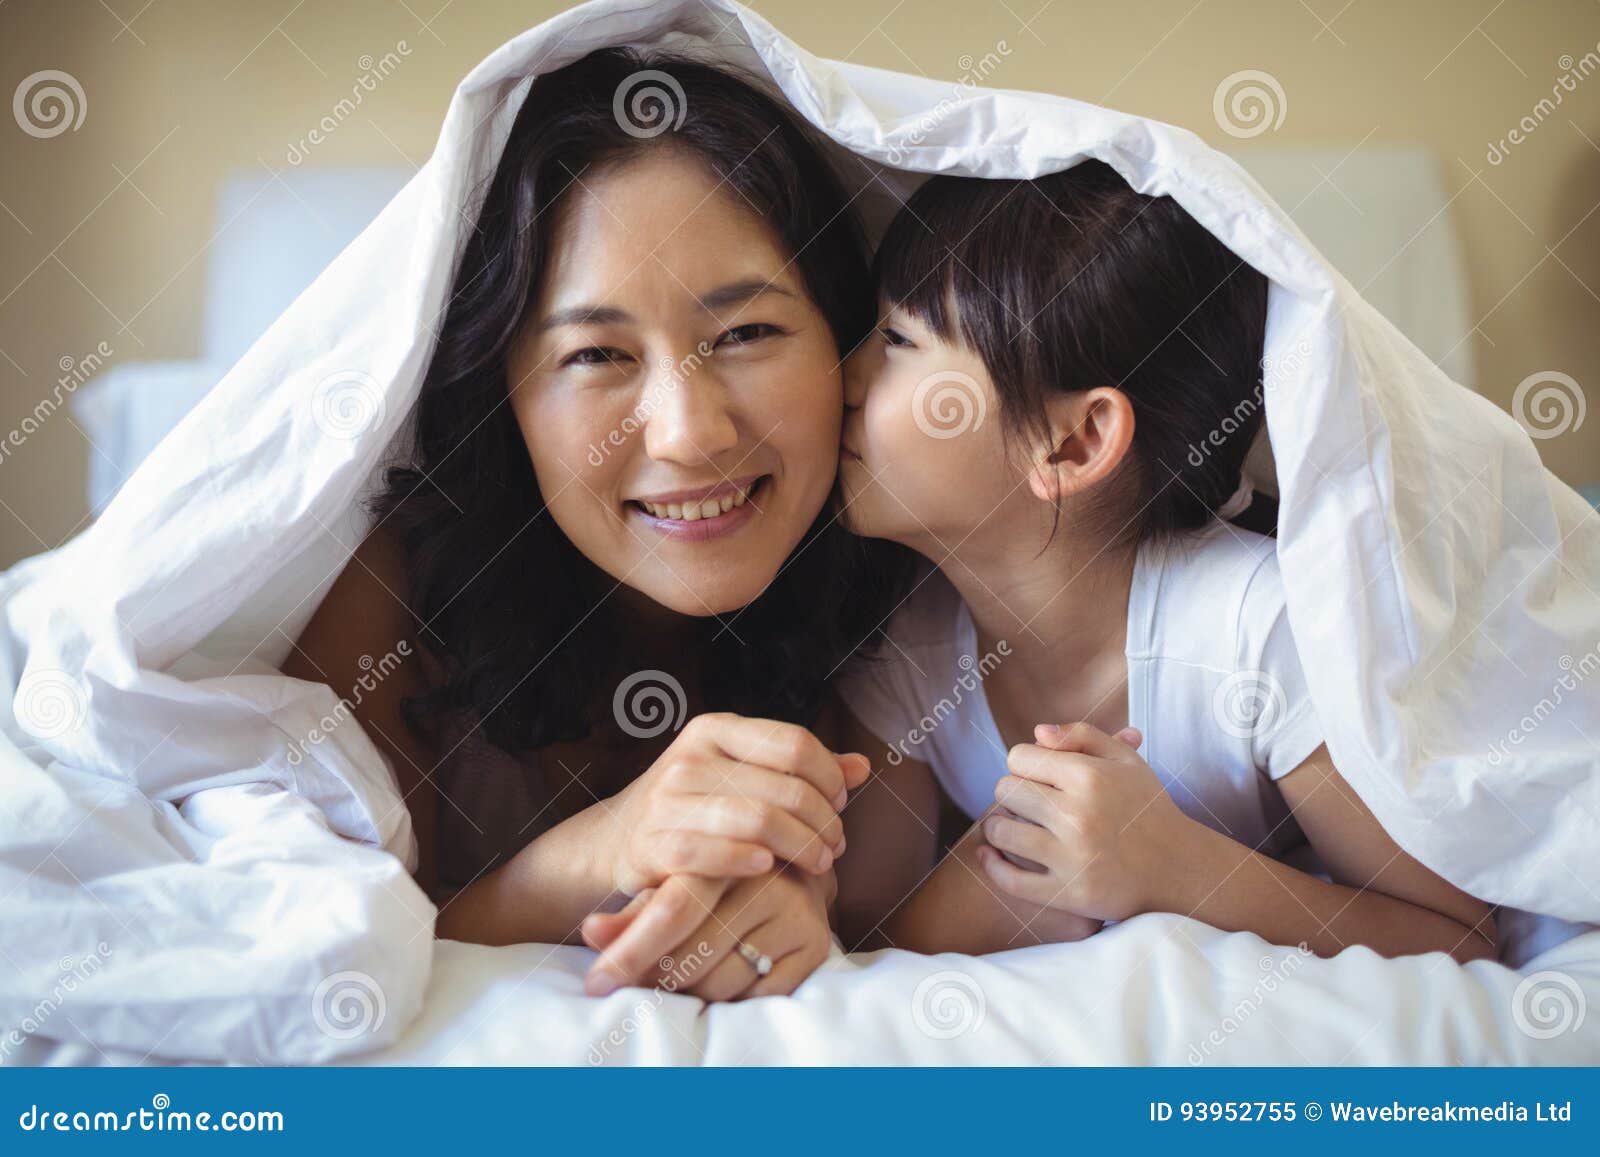 Брат мама одеяло. Under the Blanket with my son. Mom bj under Blanket. Asian woman looking under Blanket.